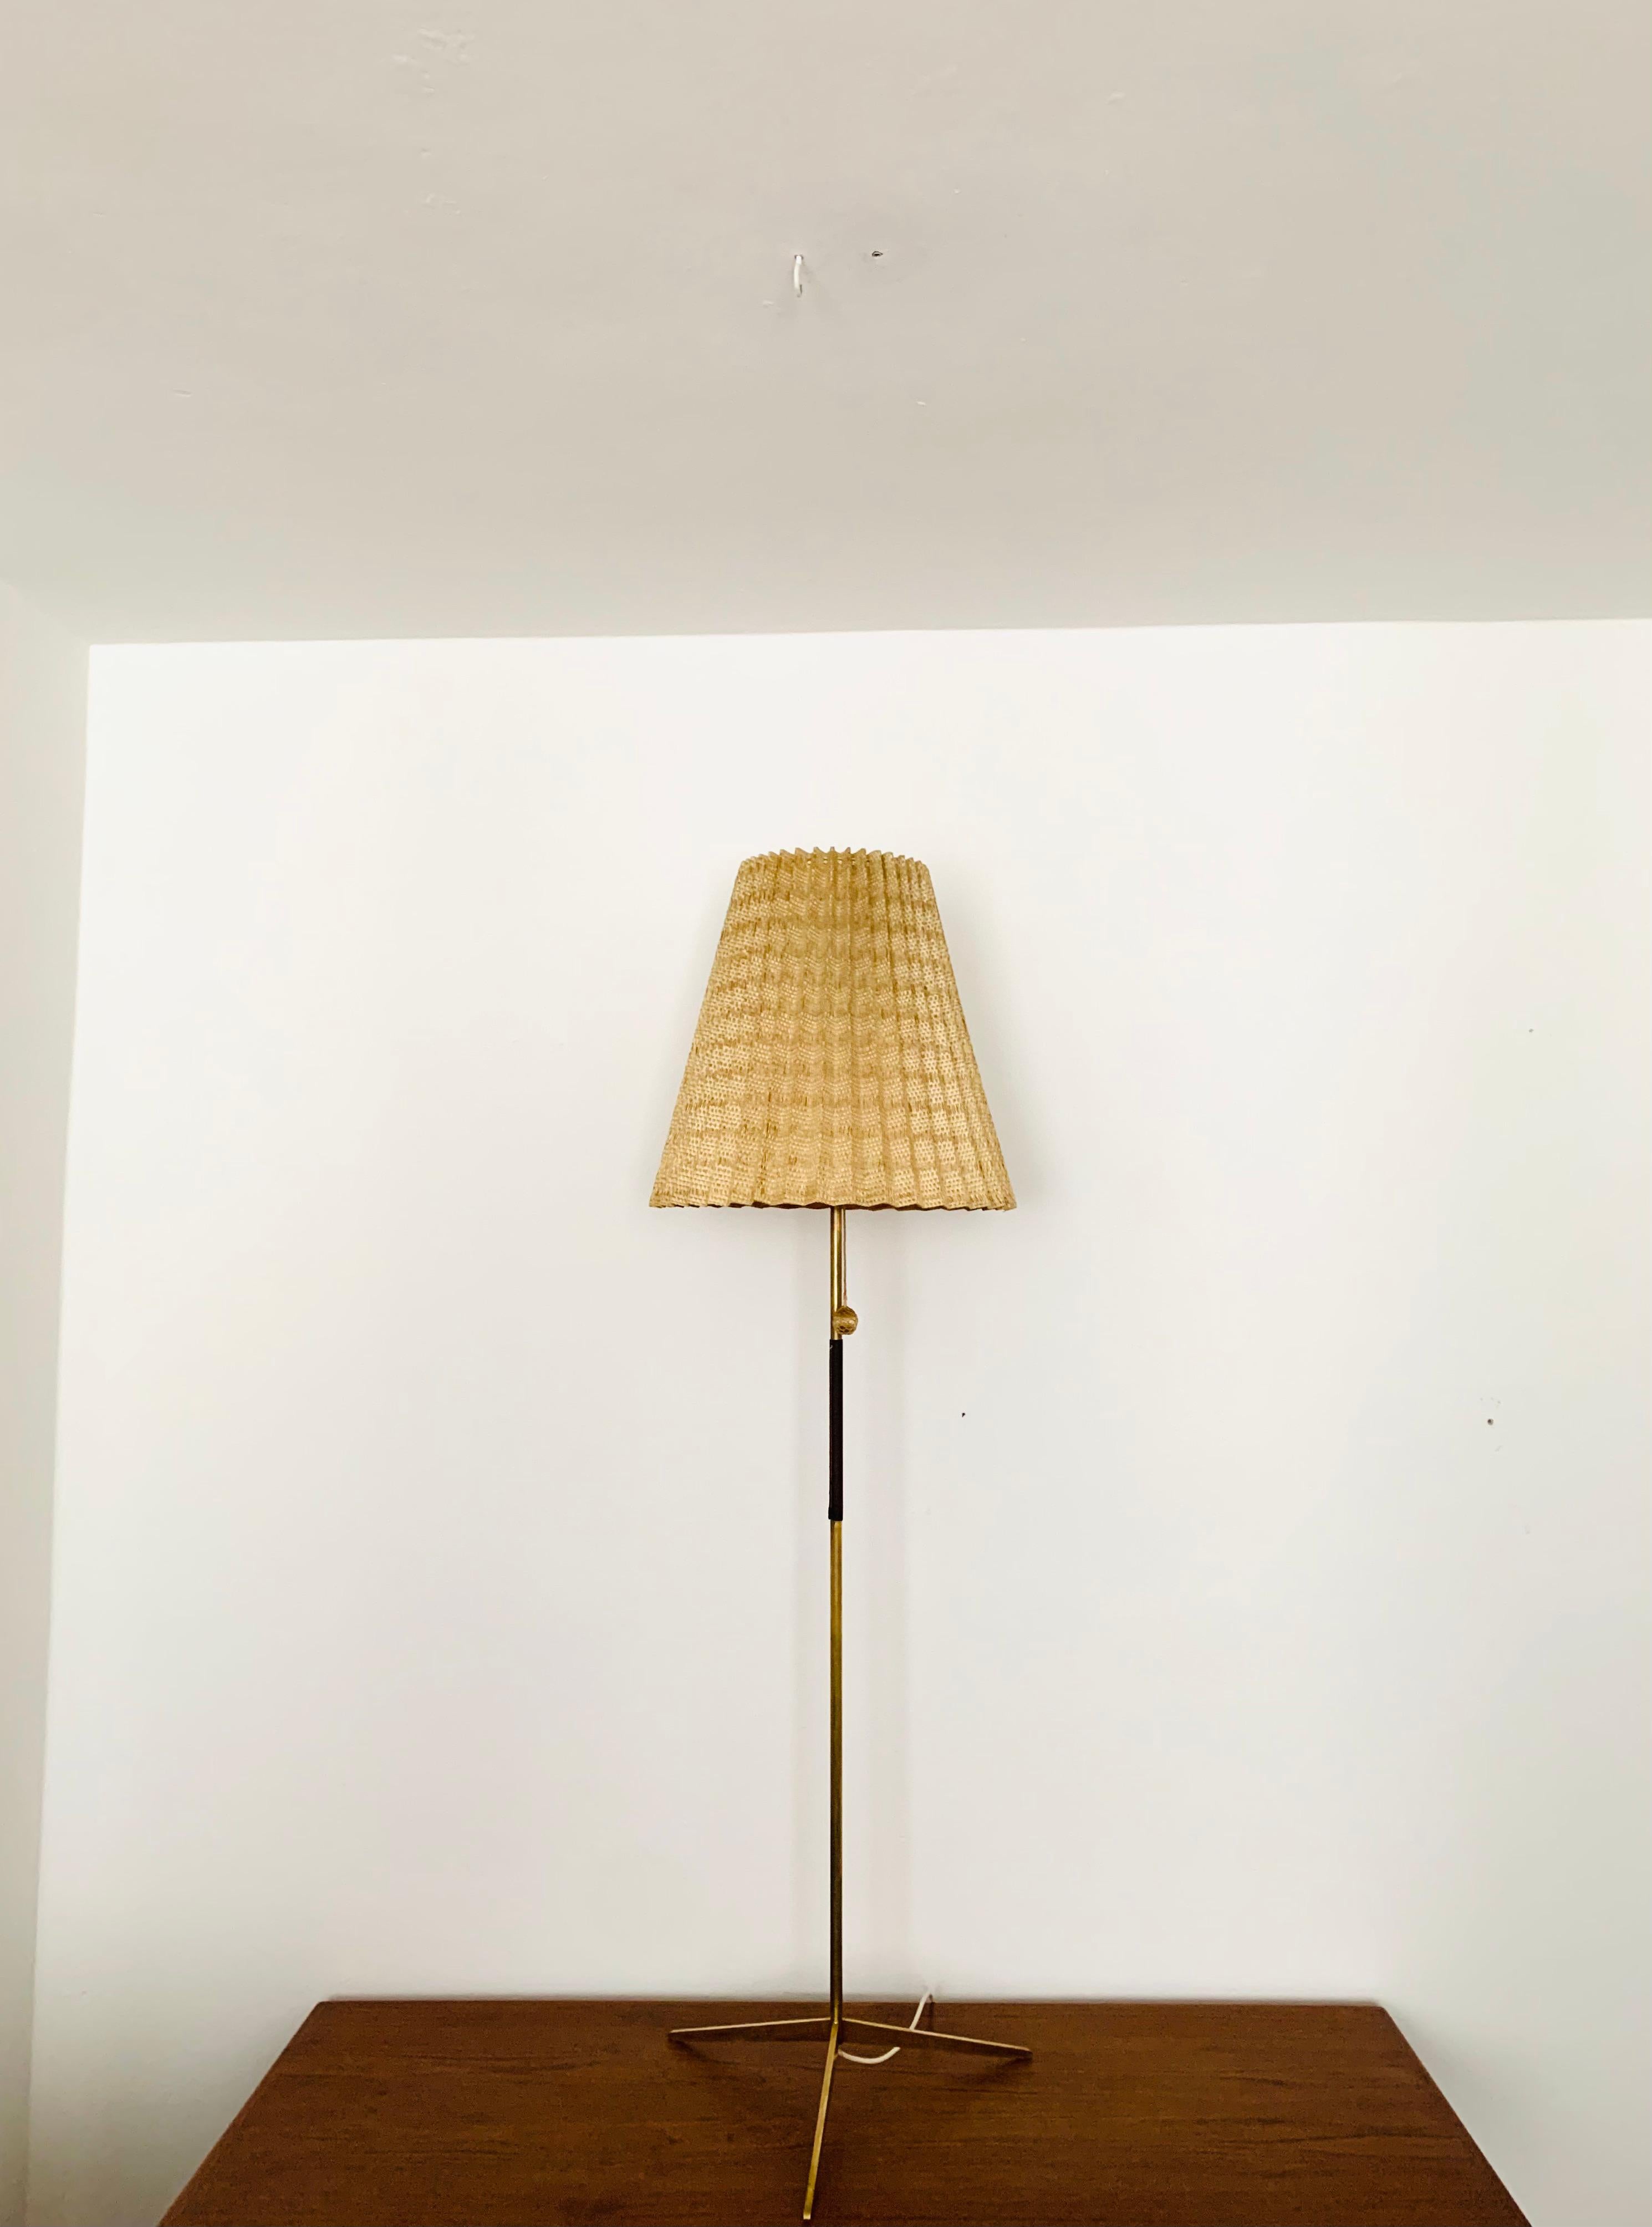 Very nice brass floor lamp from the 1950s.
Great design and high quality workmanship.
The loving details and the very pleasant lighting effect make the lamp special and a real favorite.

Condition:

Very good vintage condition with slight